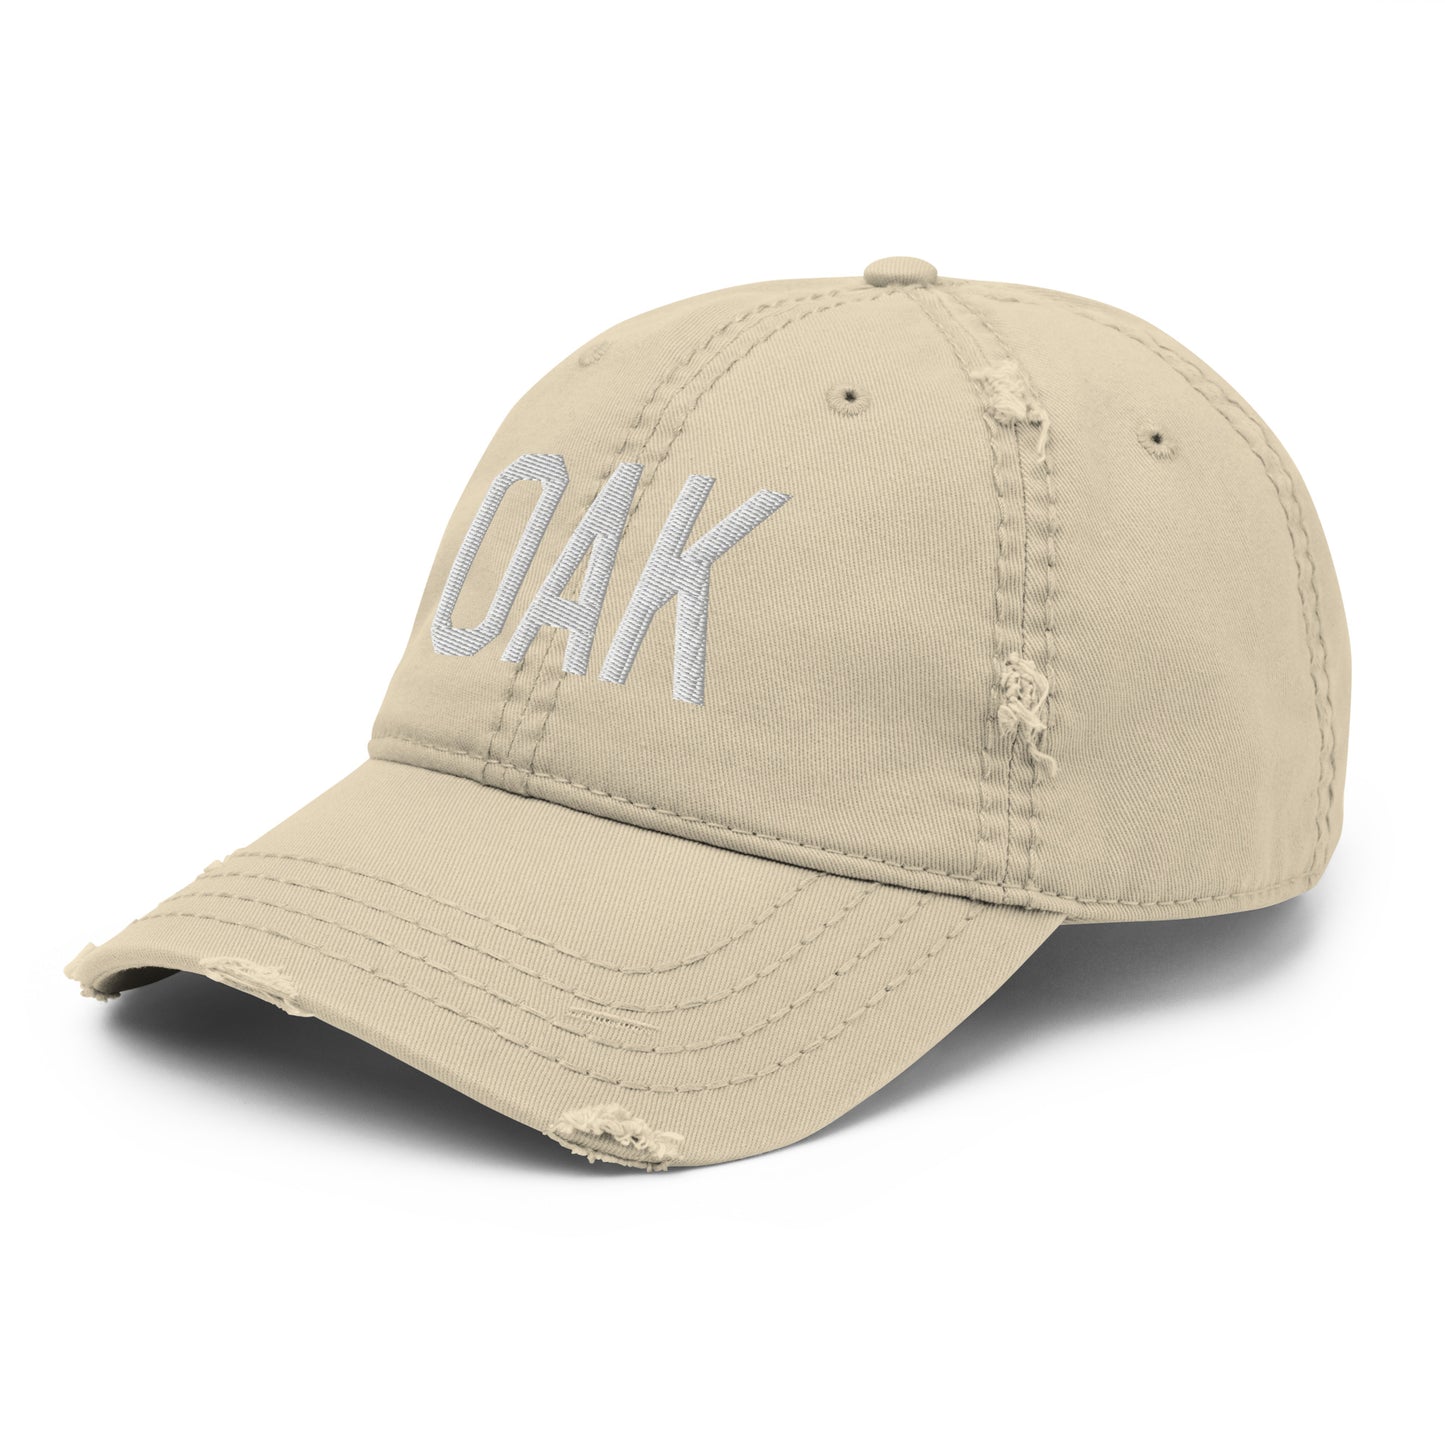 Airport Code Distressed Hat - White • OAK Oakland • YHM Designs - Image 19